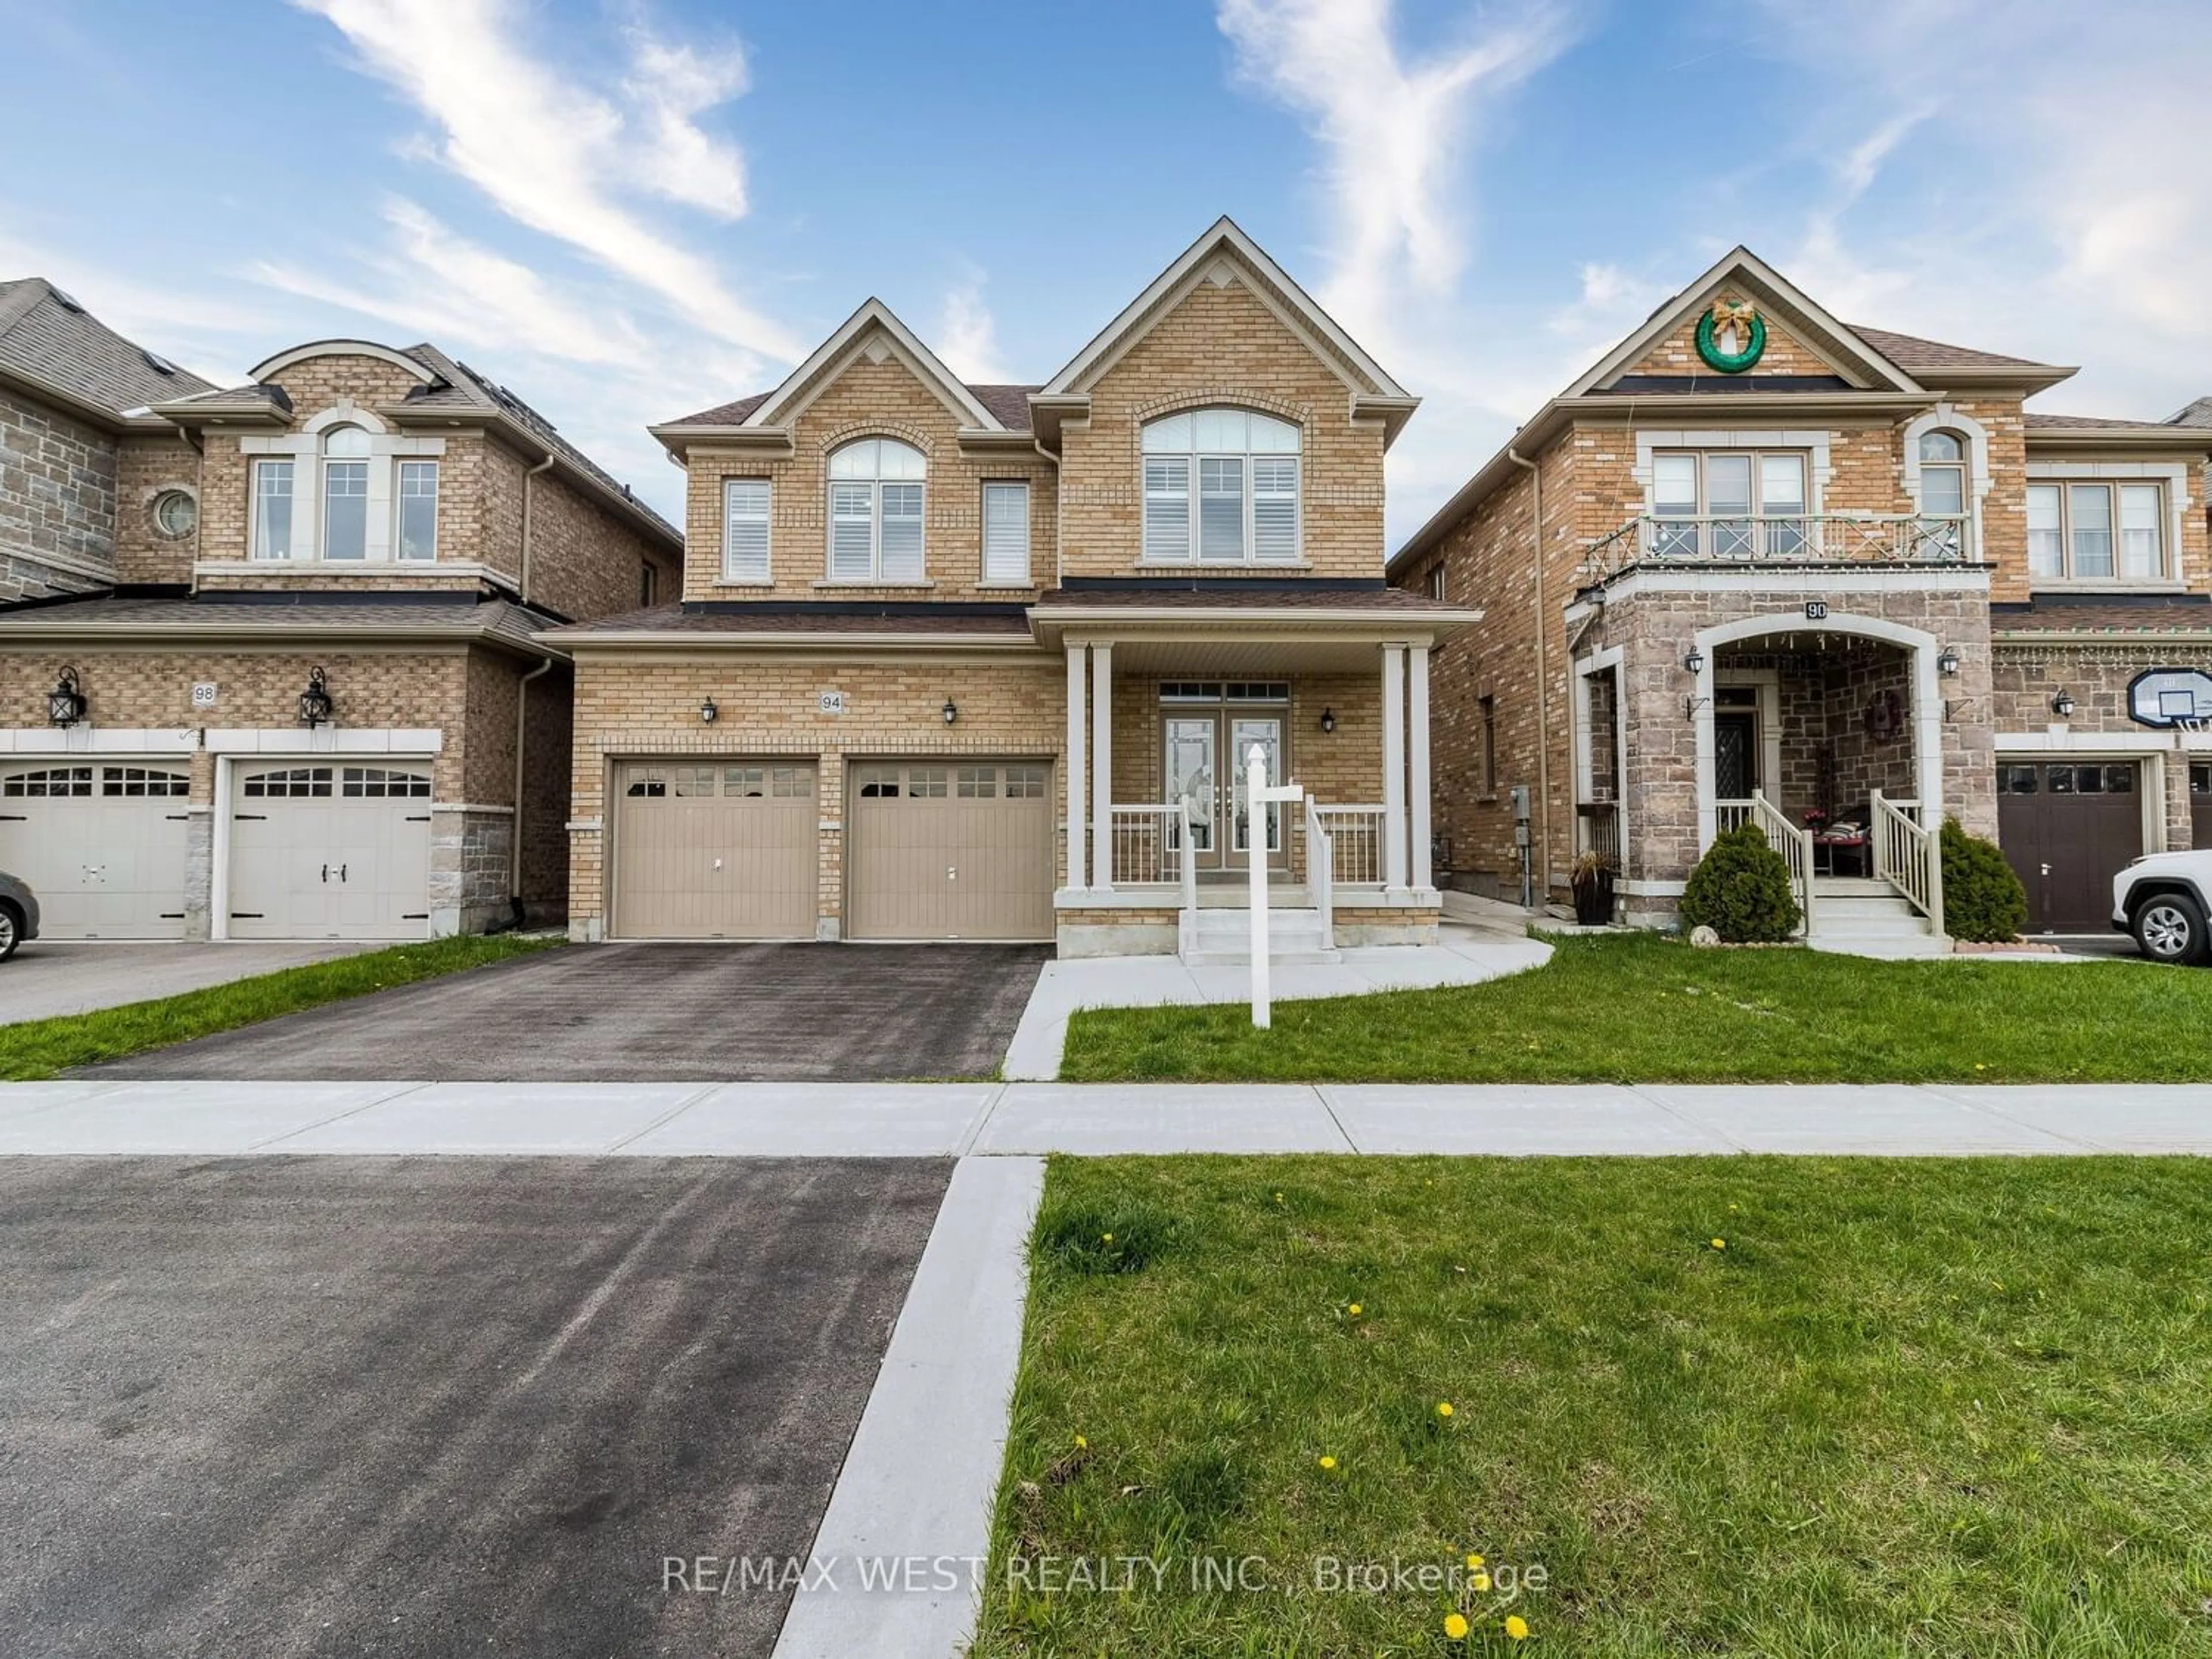 Home with brick exterior material for 94 Barrow Ave, Bradford West Gwillimbury Ontario L3Z 2A6